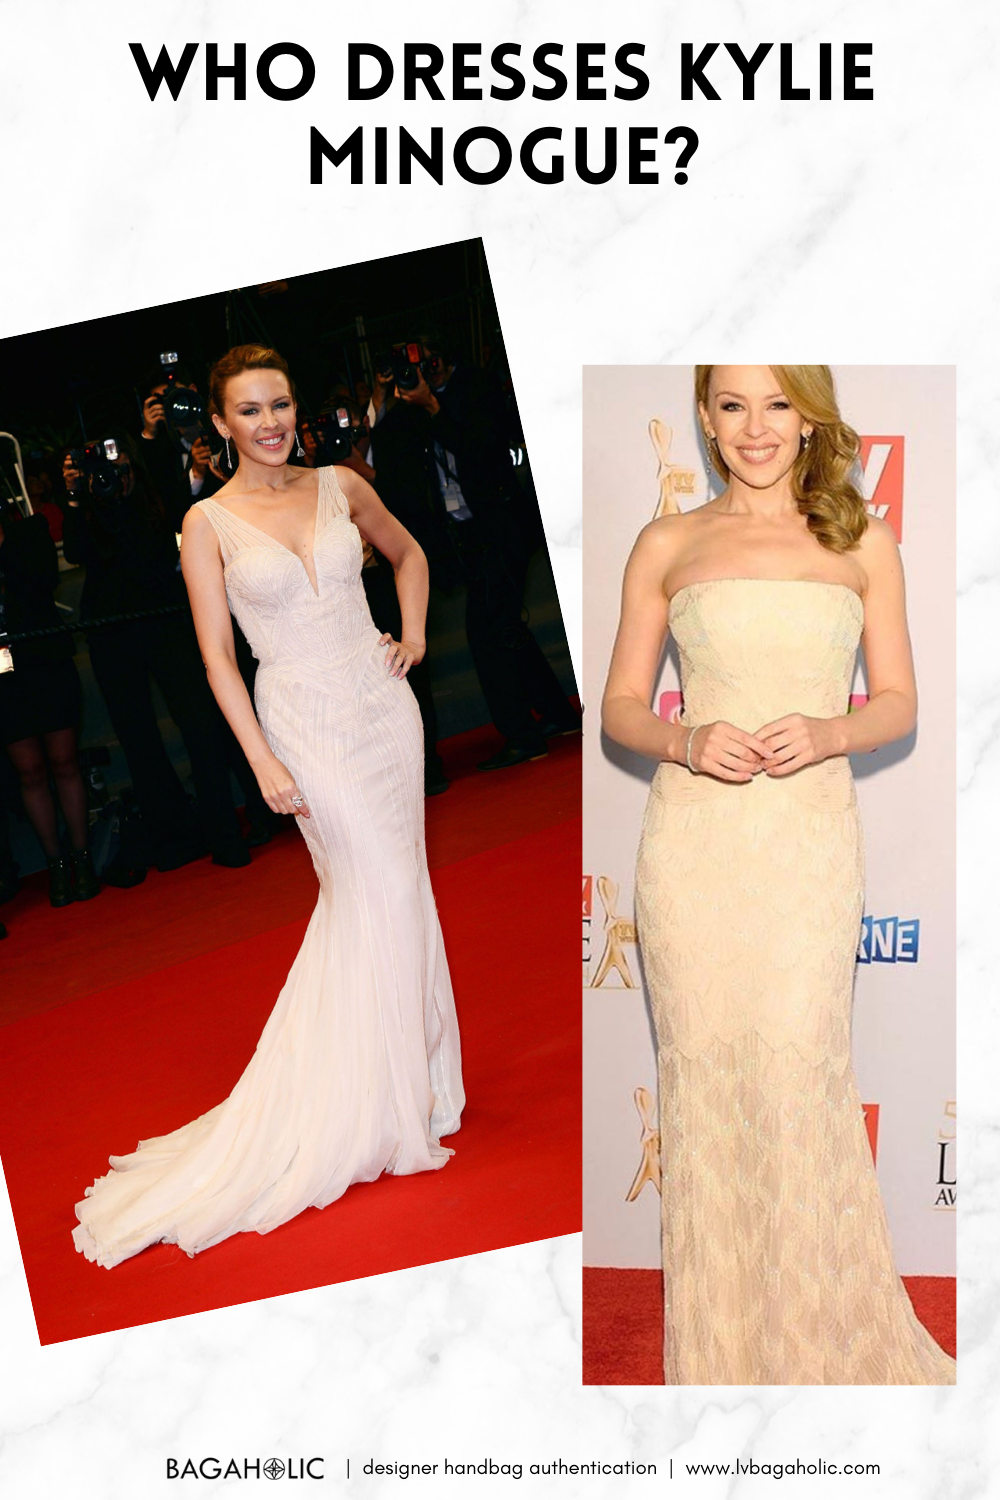 The Legacy of Roberto CavalliWHO DRESSES KYLIE MINOGUE?